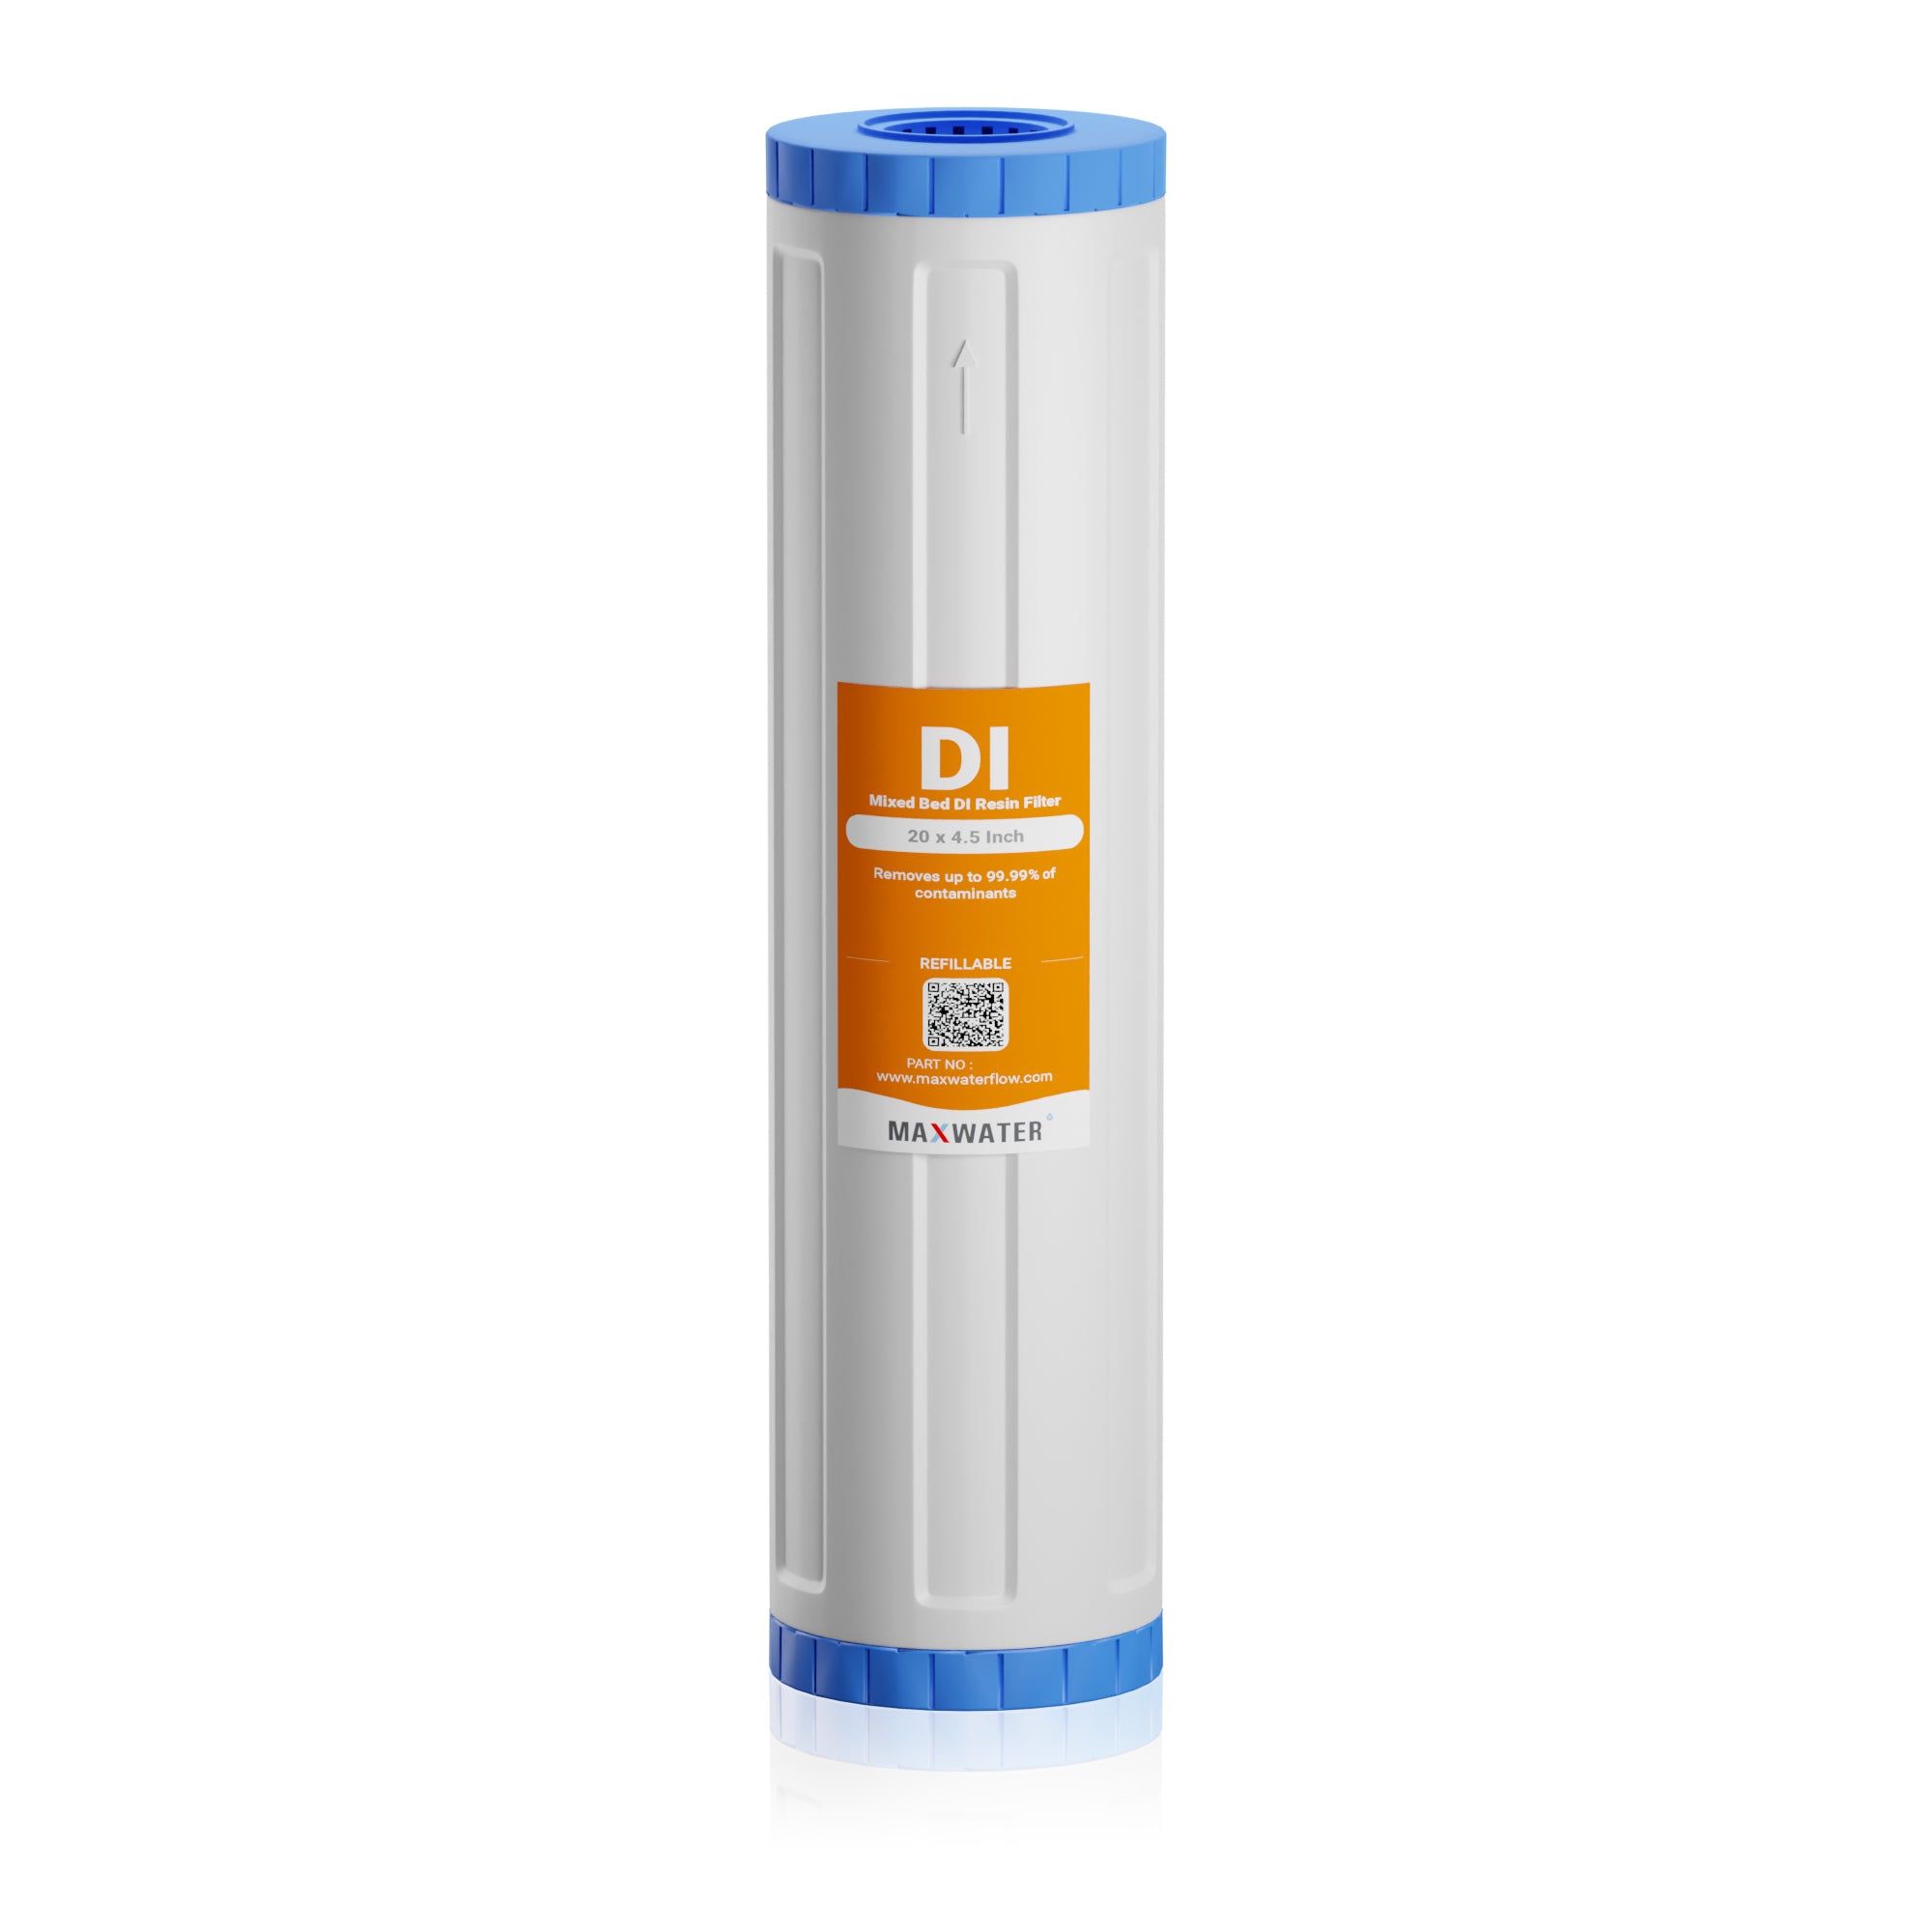 10 DI Refillable Filter In-Line Housing With DI Resin